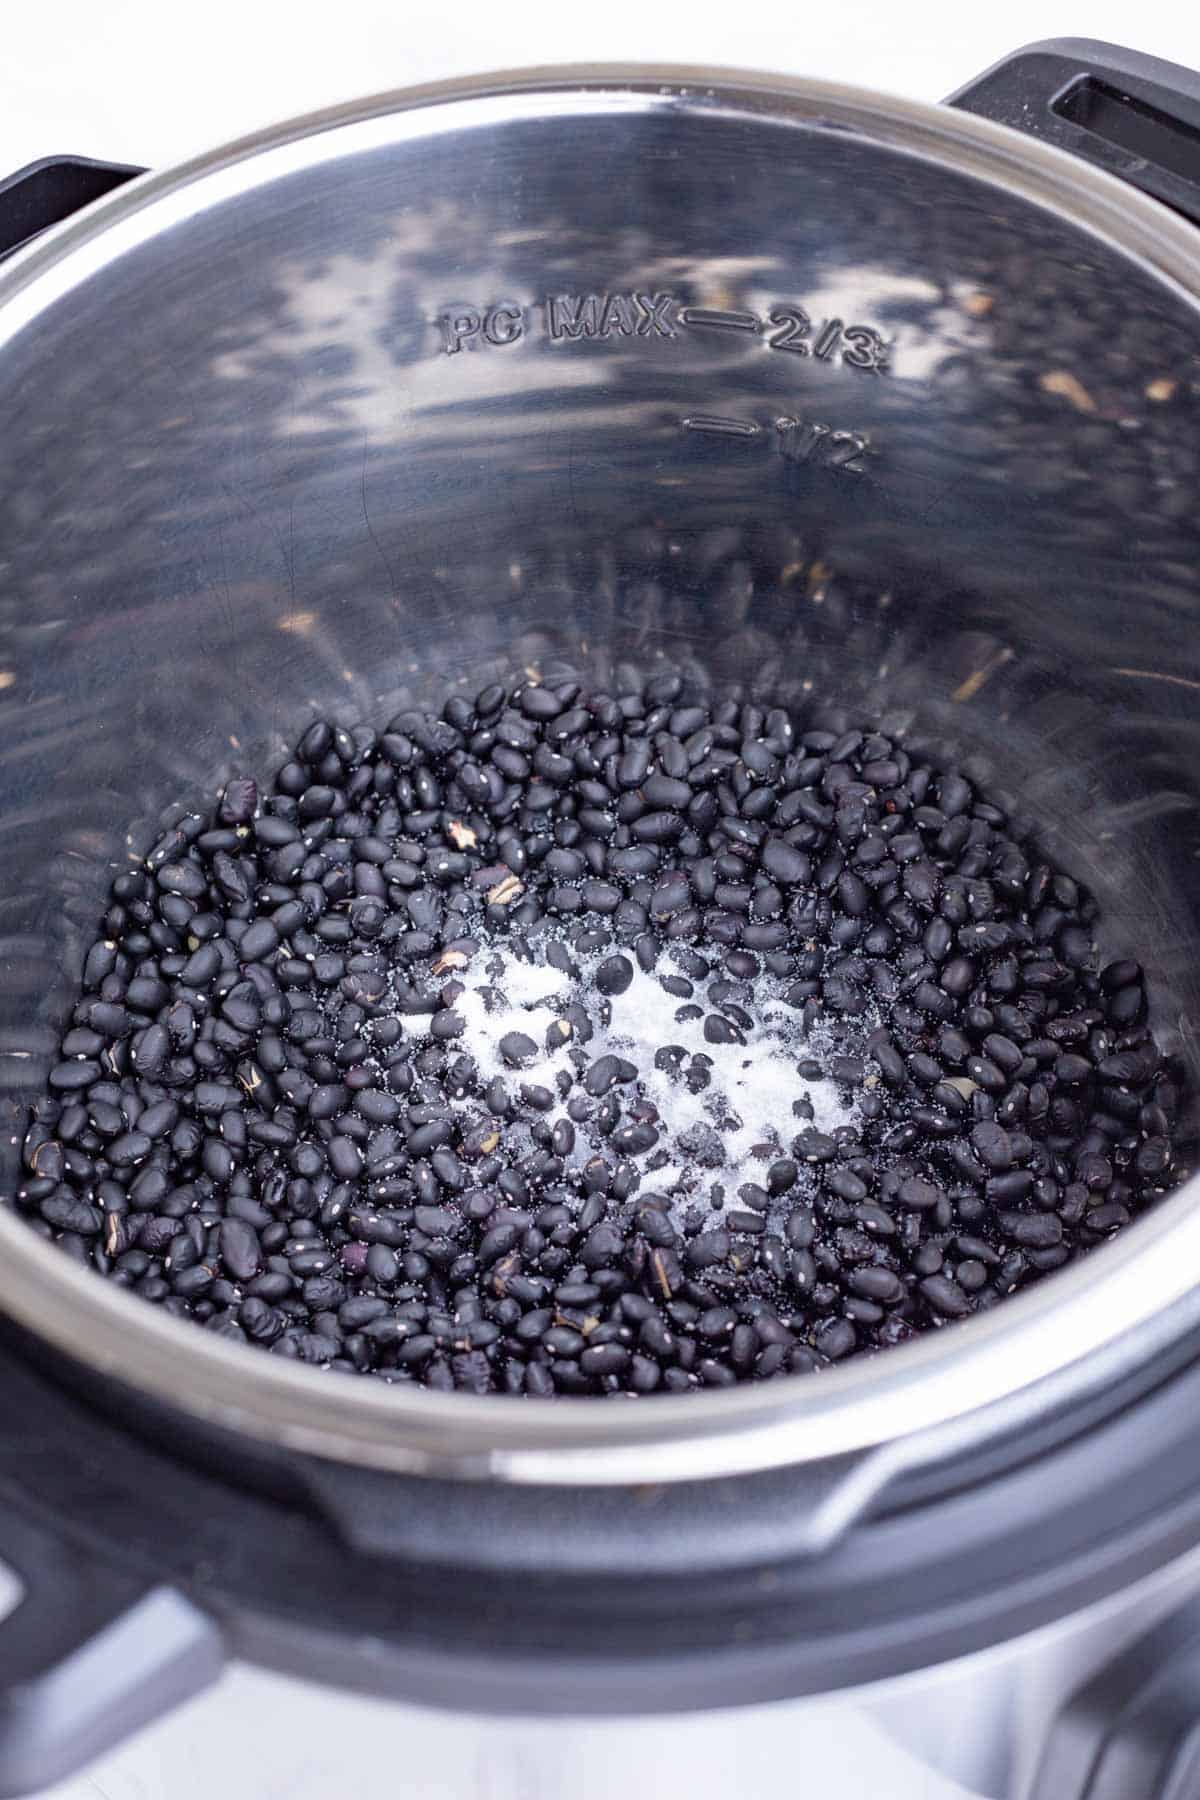 Salt is added to the black beans.